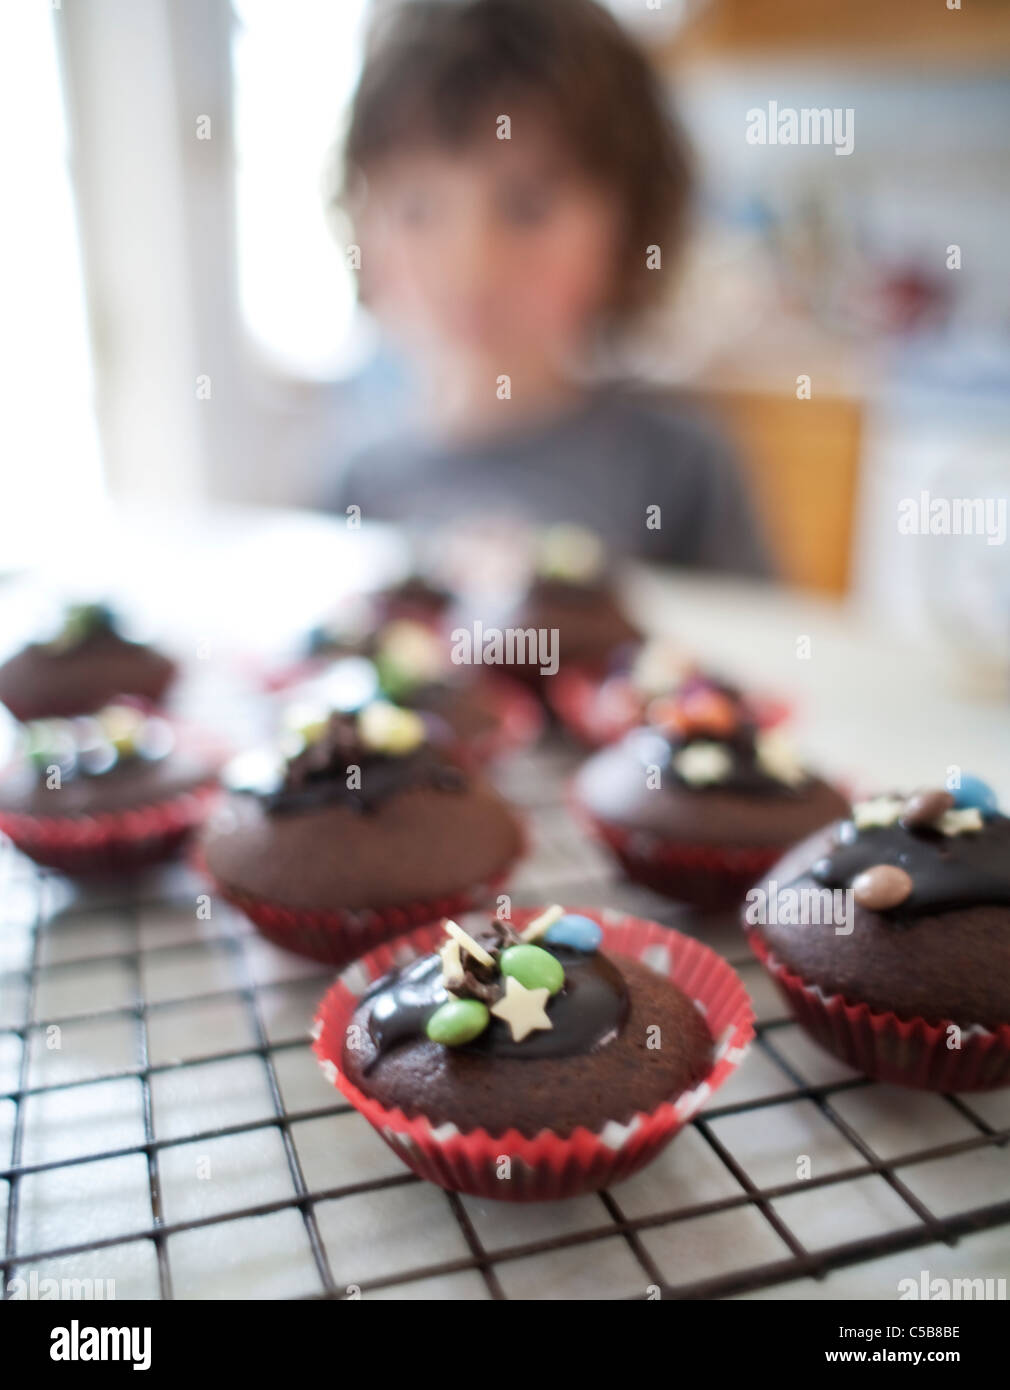 Child with homemade cupcakes Stock Photo